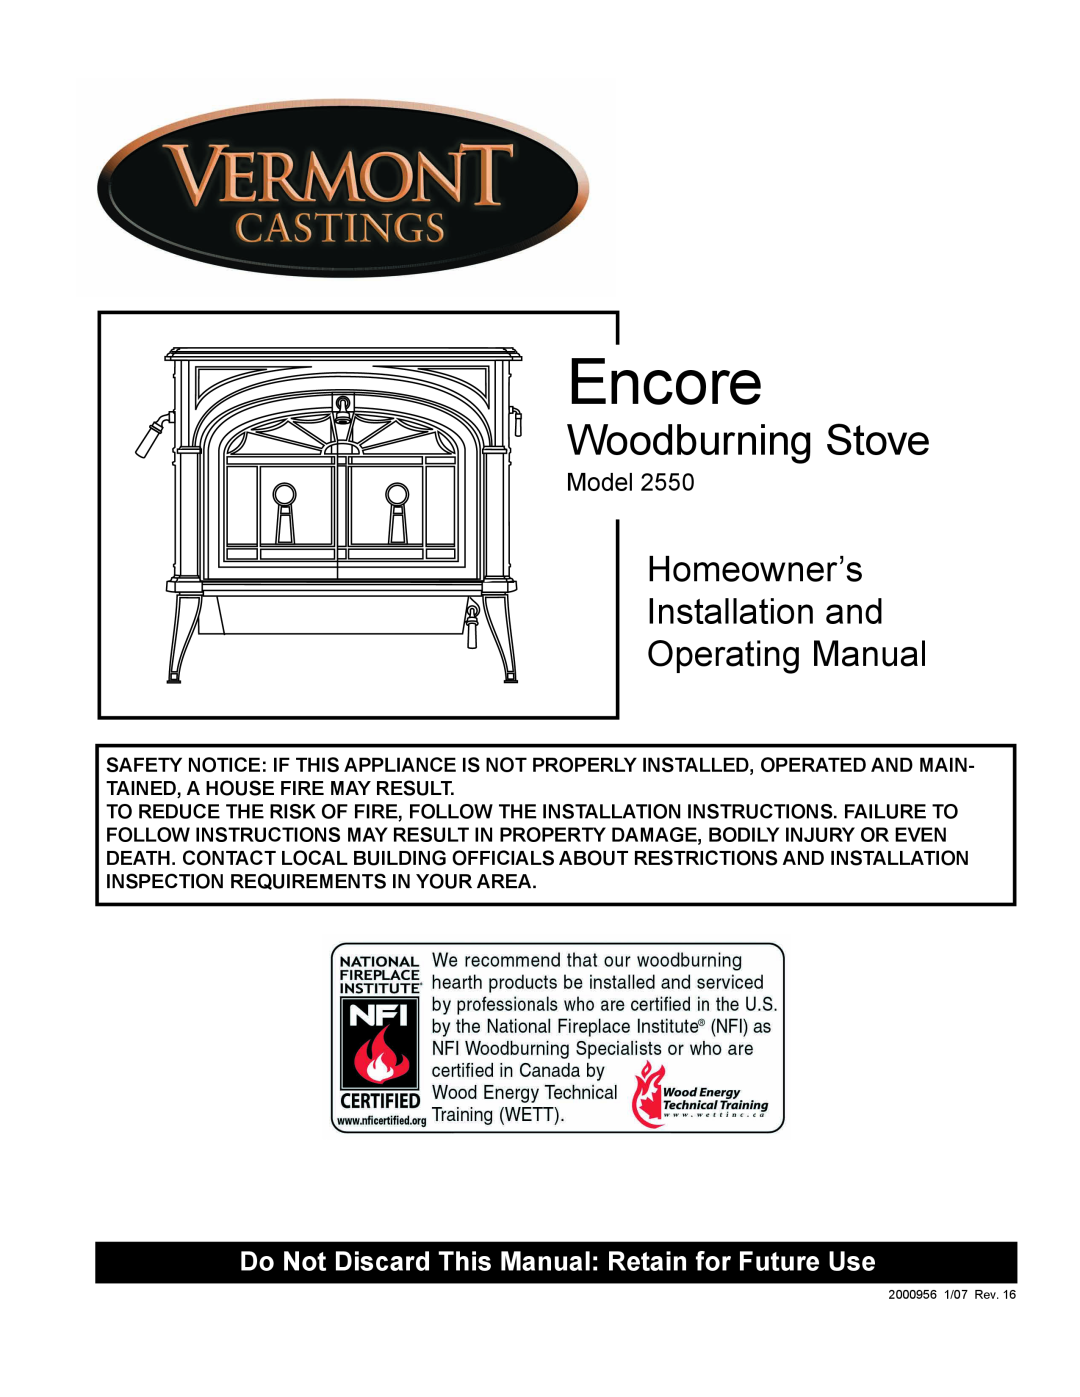 Vermont Casting 2550 installation instructions Encore, Woodburning Stove, Homeowner’s Installation and Operating Manual 